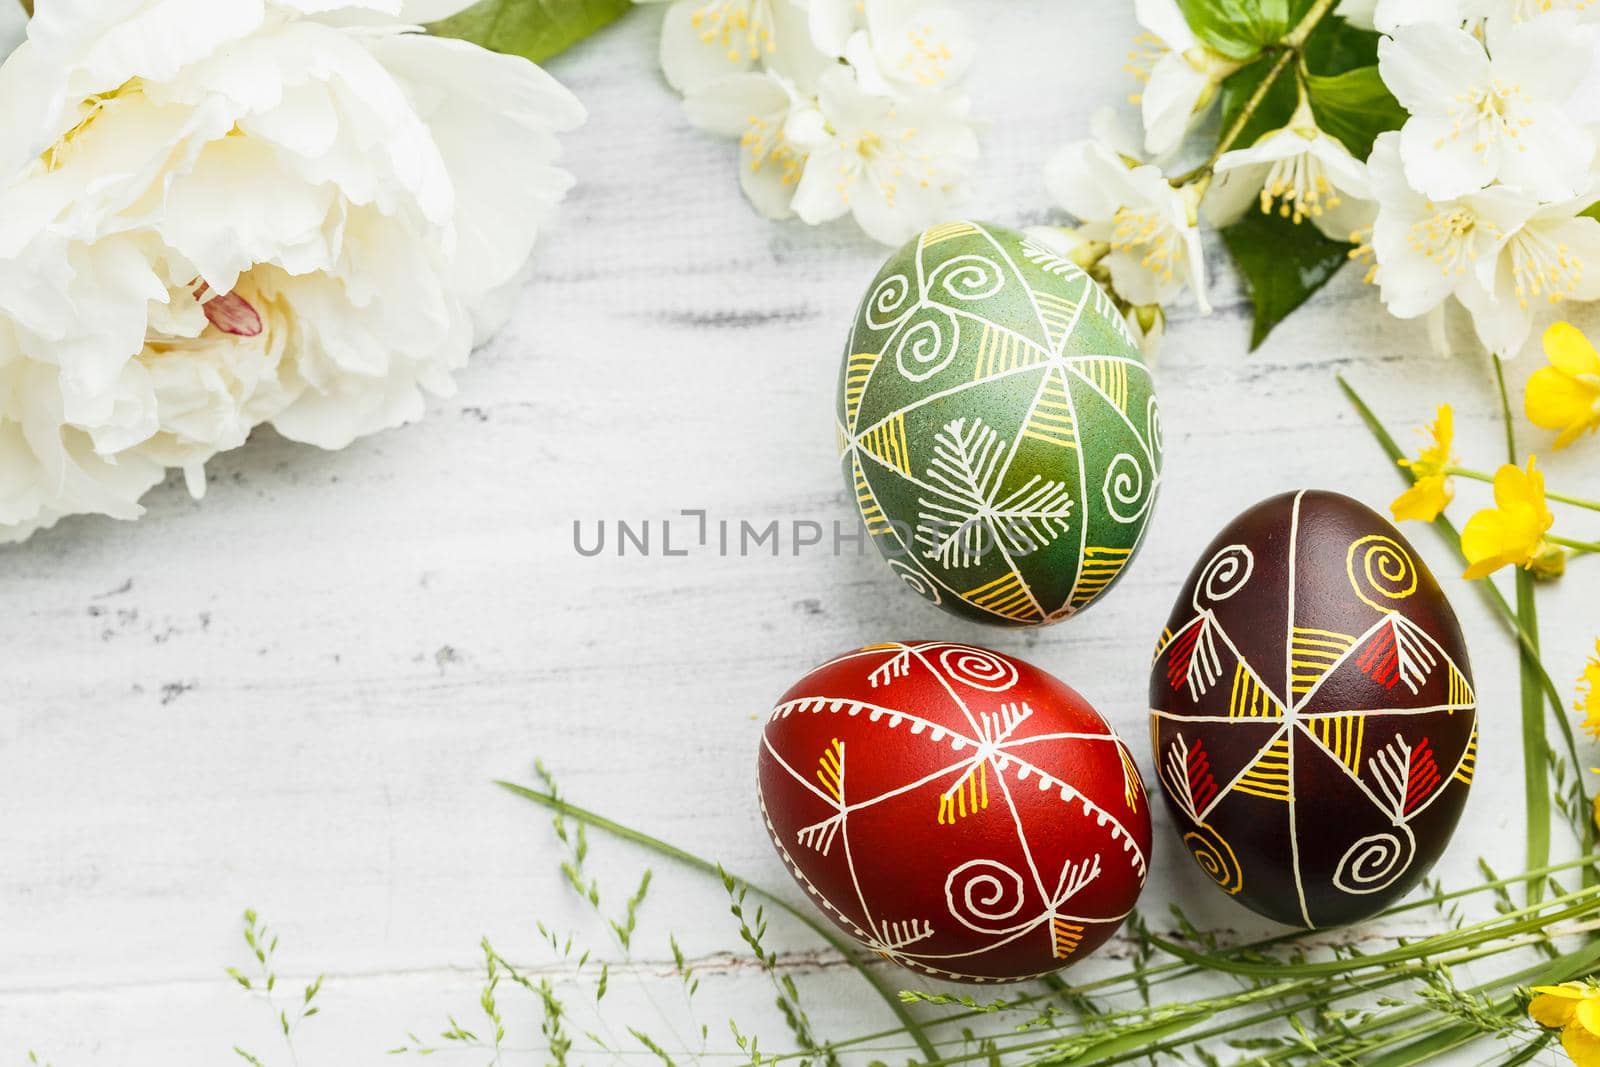 Pysanky Ukrainian Easter Eggs on shabby background by Syvanych